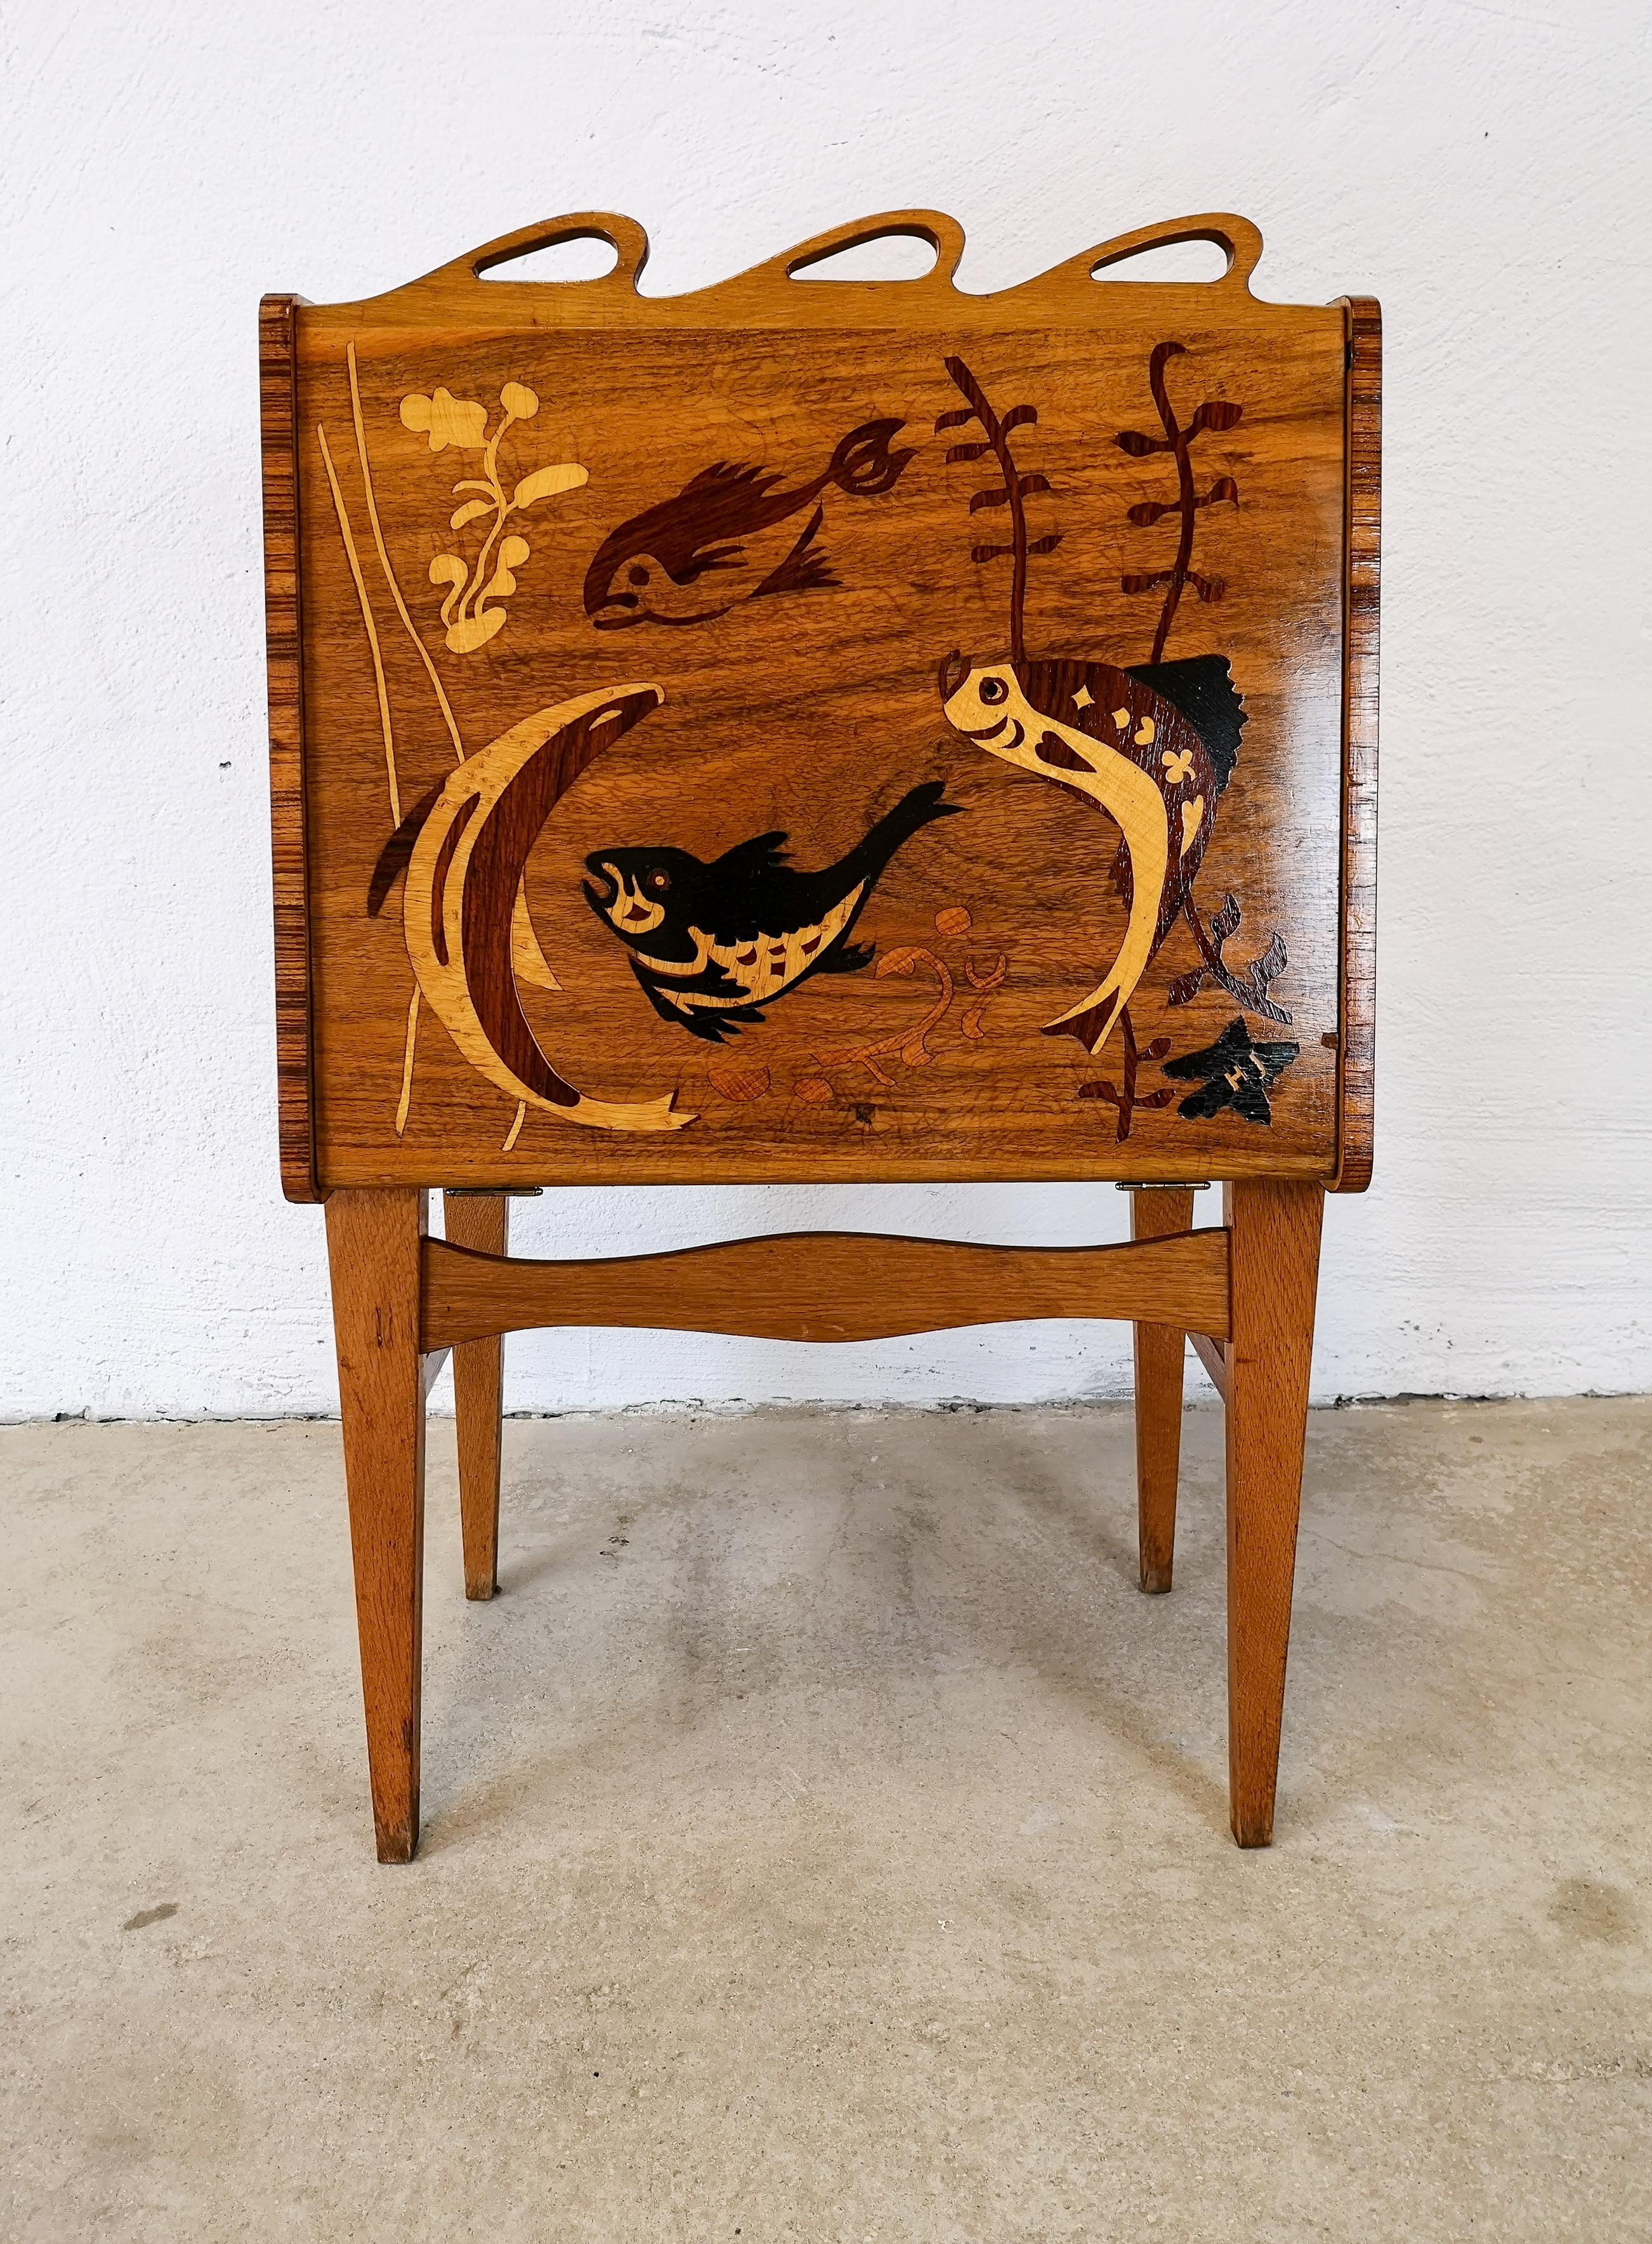 This cabinet has features that links it to famous Mjölby Intarsia. They were famous to make inlays of wood to give cabinets etc. that exclusive look.
The cabinet itself has inlays of fishes and gives the owner a possibility to open and store for